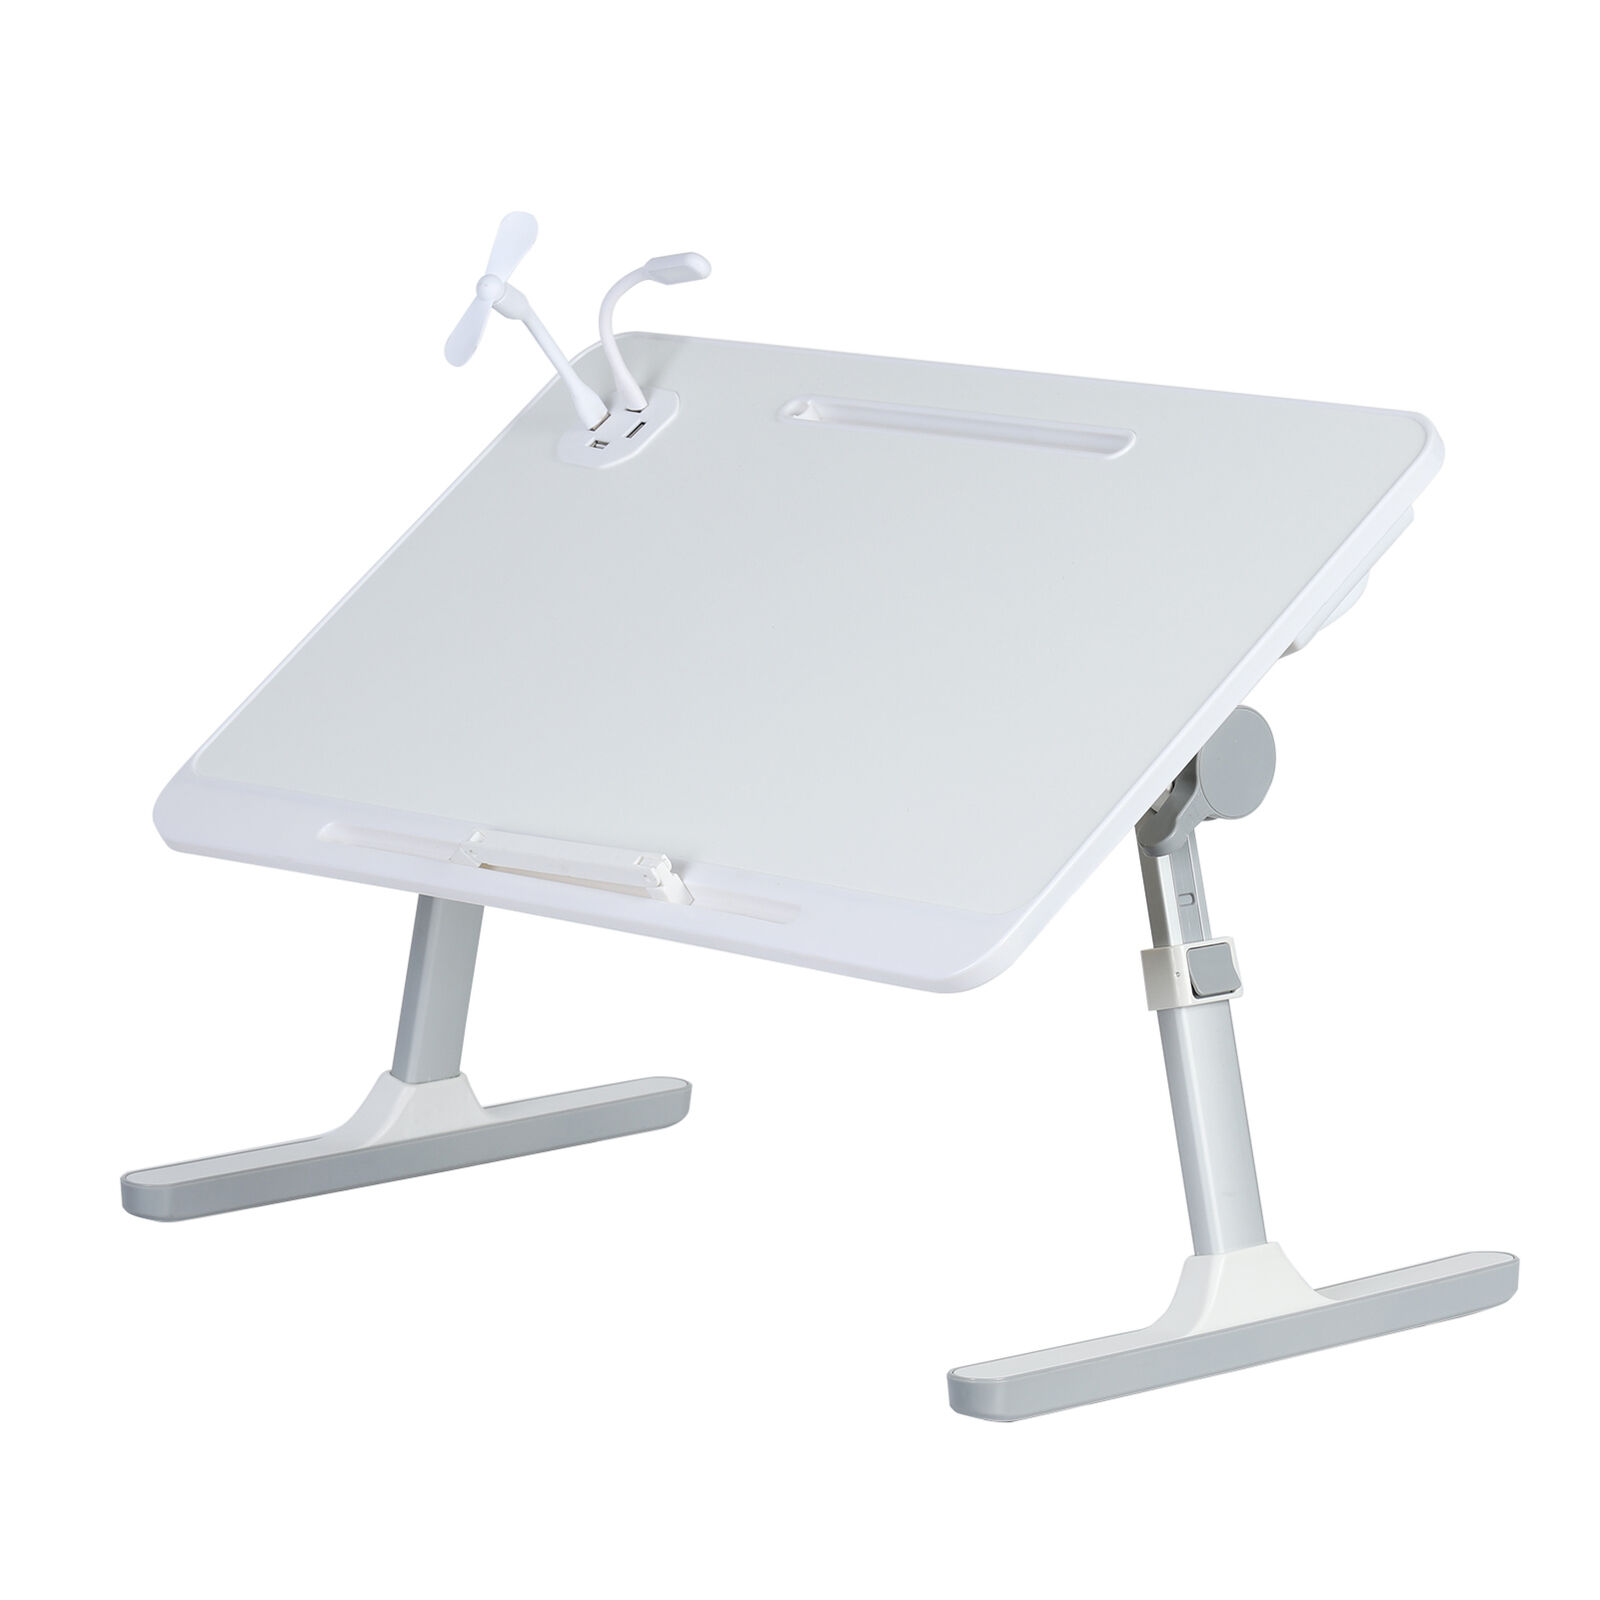 Laptop Bed Tray Table Adjustable Laptop Bed Stand with Foldable Legs